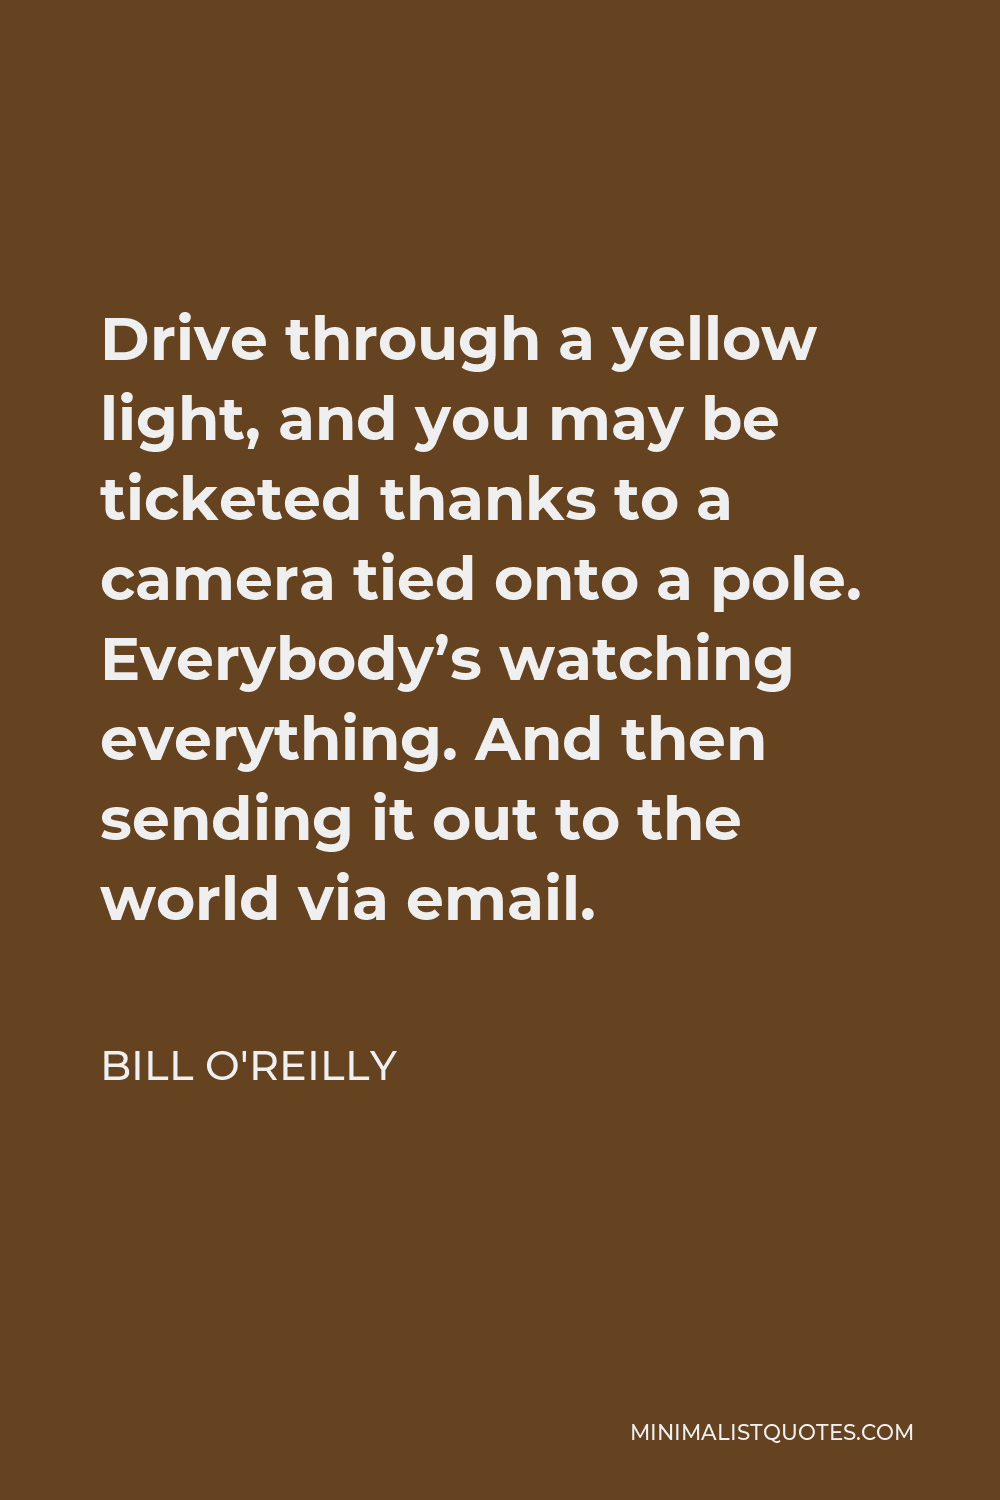 Bill O'Reilly Quote - Drive through a yellow light, and you may be ticketed thanks to a camera tied onto a pole. Everybody’s watching everything. And then sending it out to the world via email.